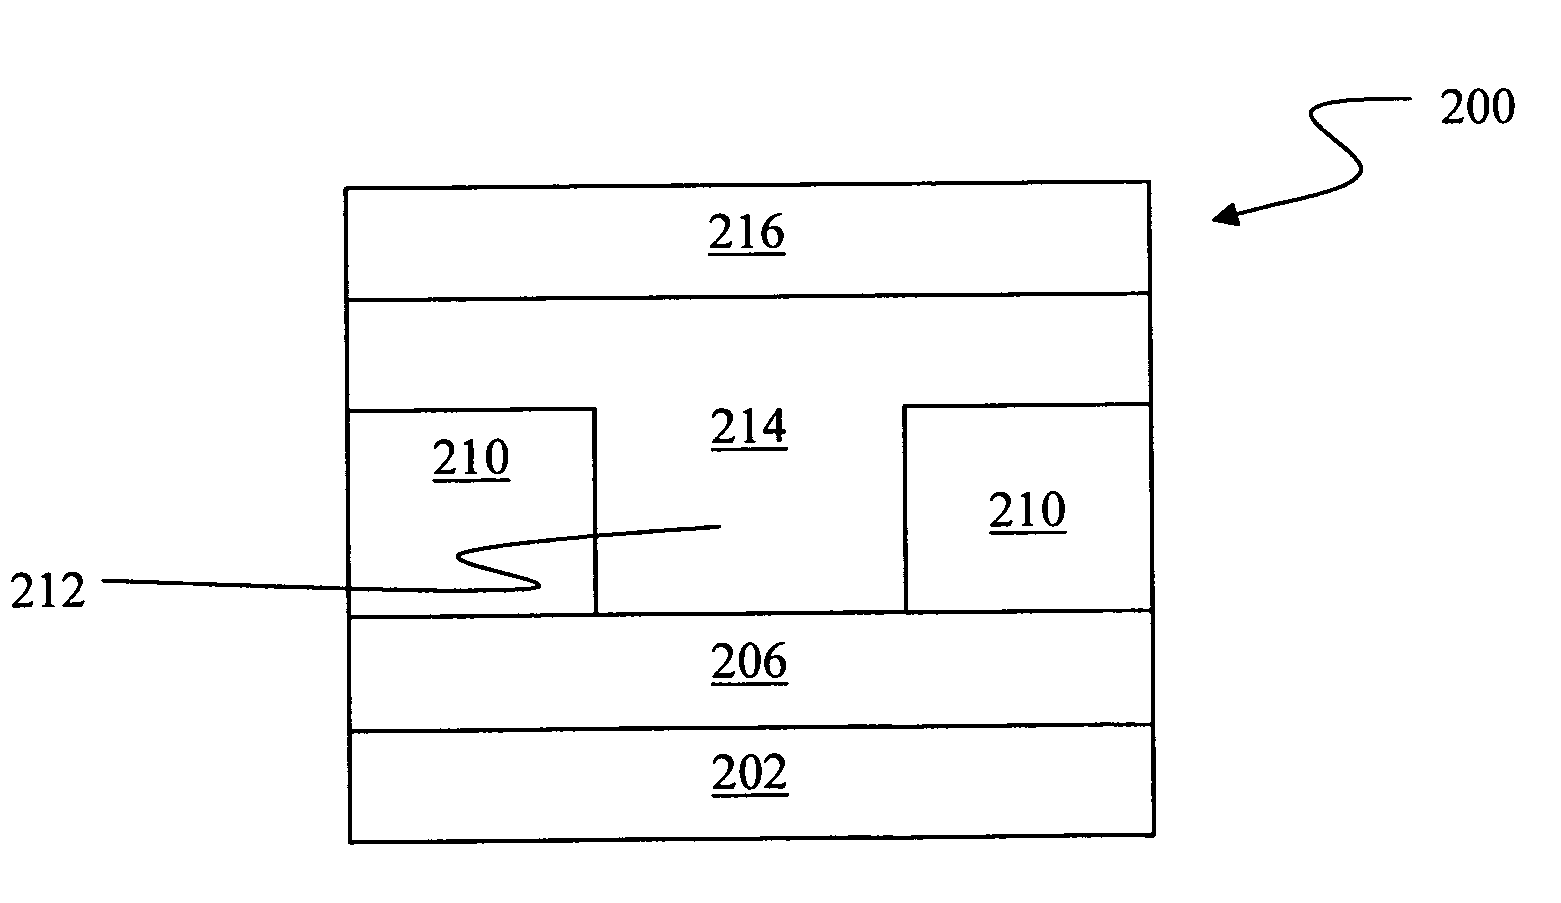 Pressure extrusion method for filling features in the fabrication of electronic devices